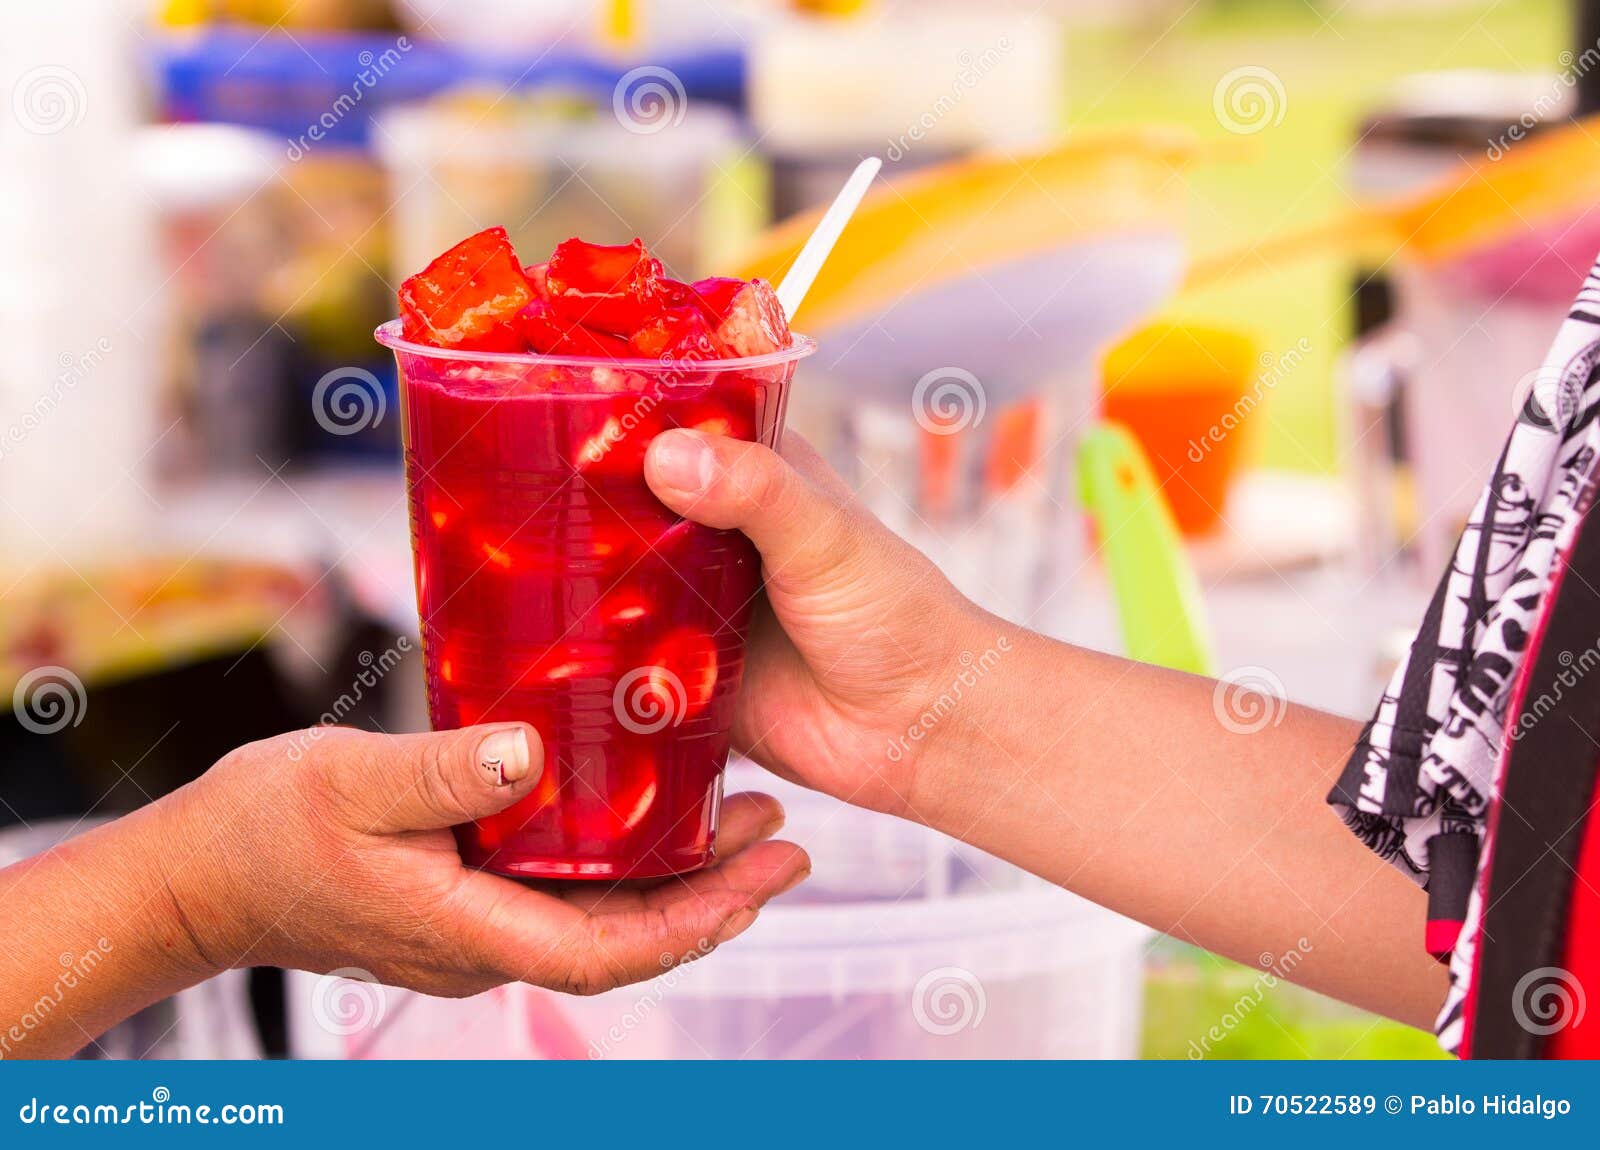 two hands holding up a glass of fruits and juice, traditional come y bebe